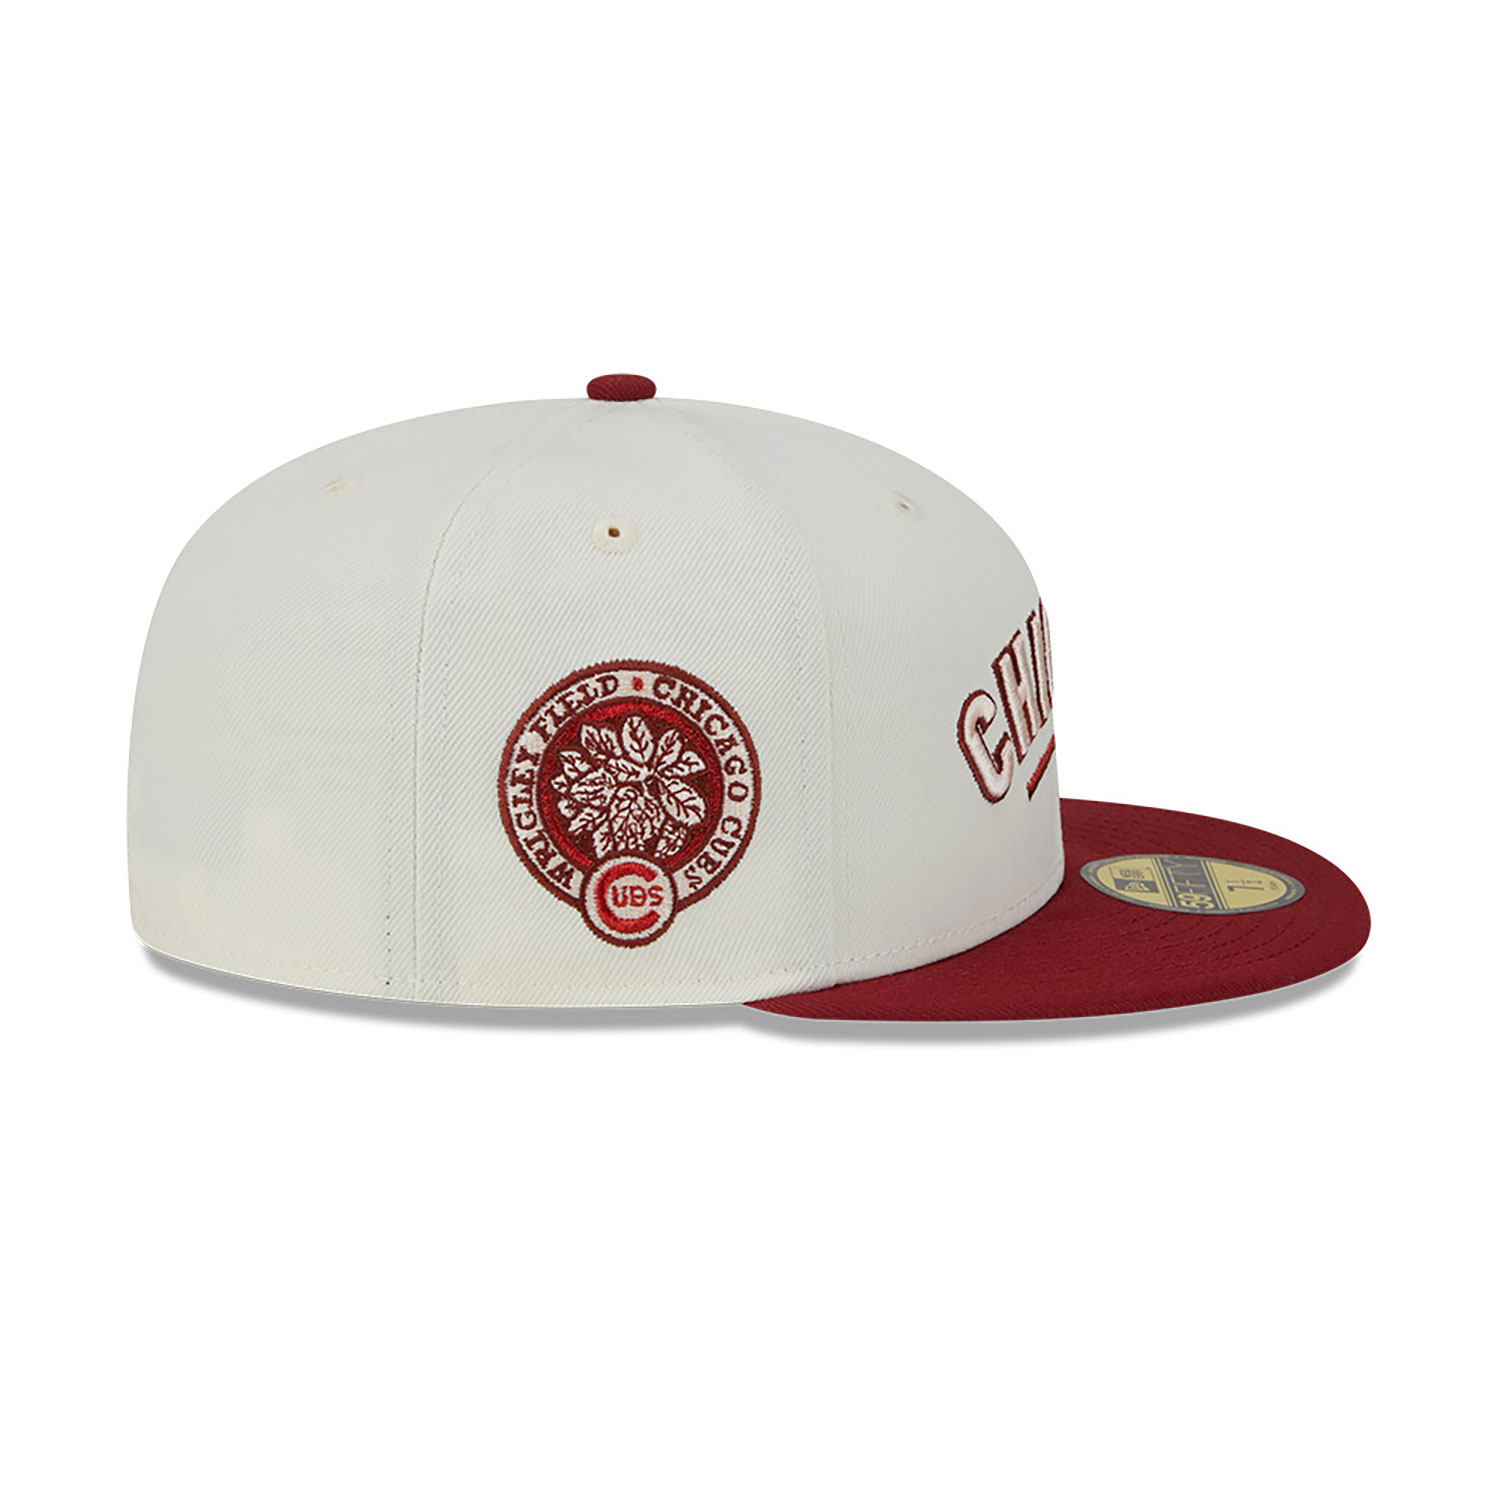 Chicago Cubs Be Mine White 59FIFTY Fitted Cap